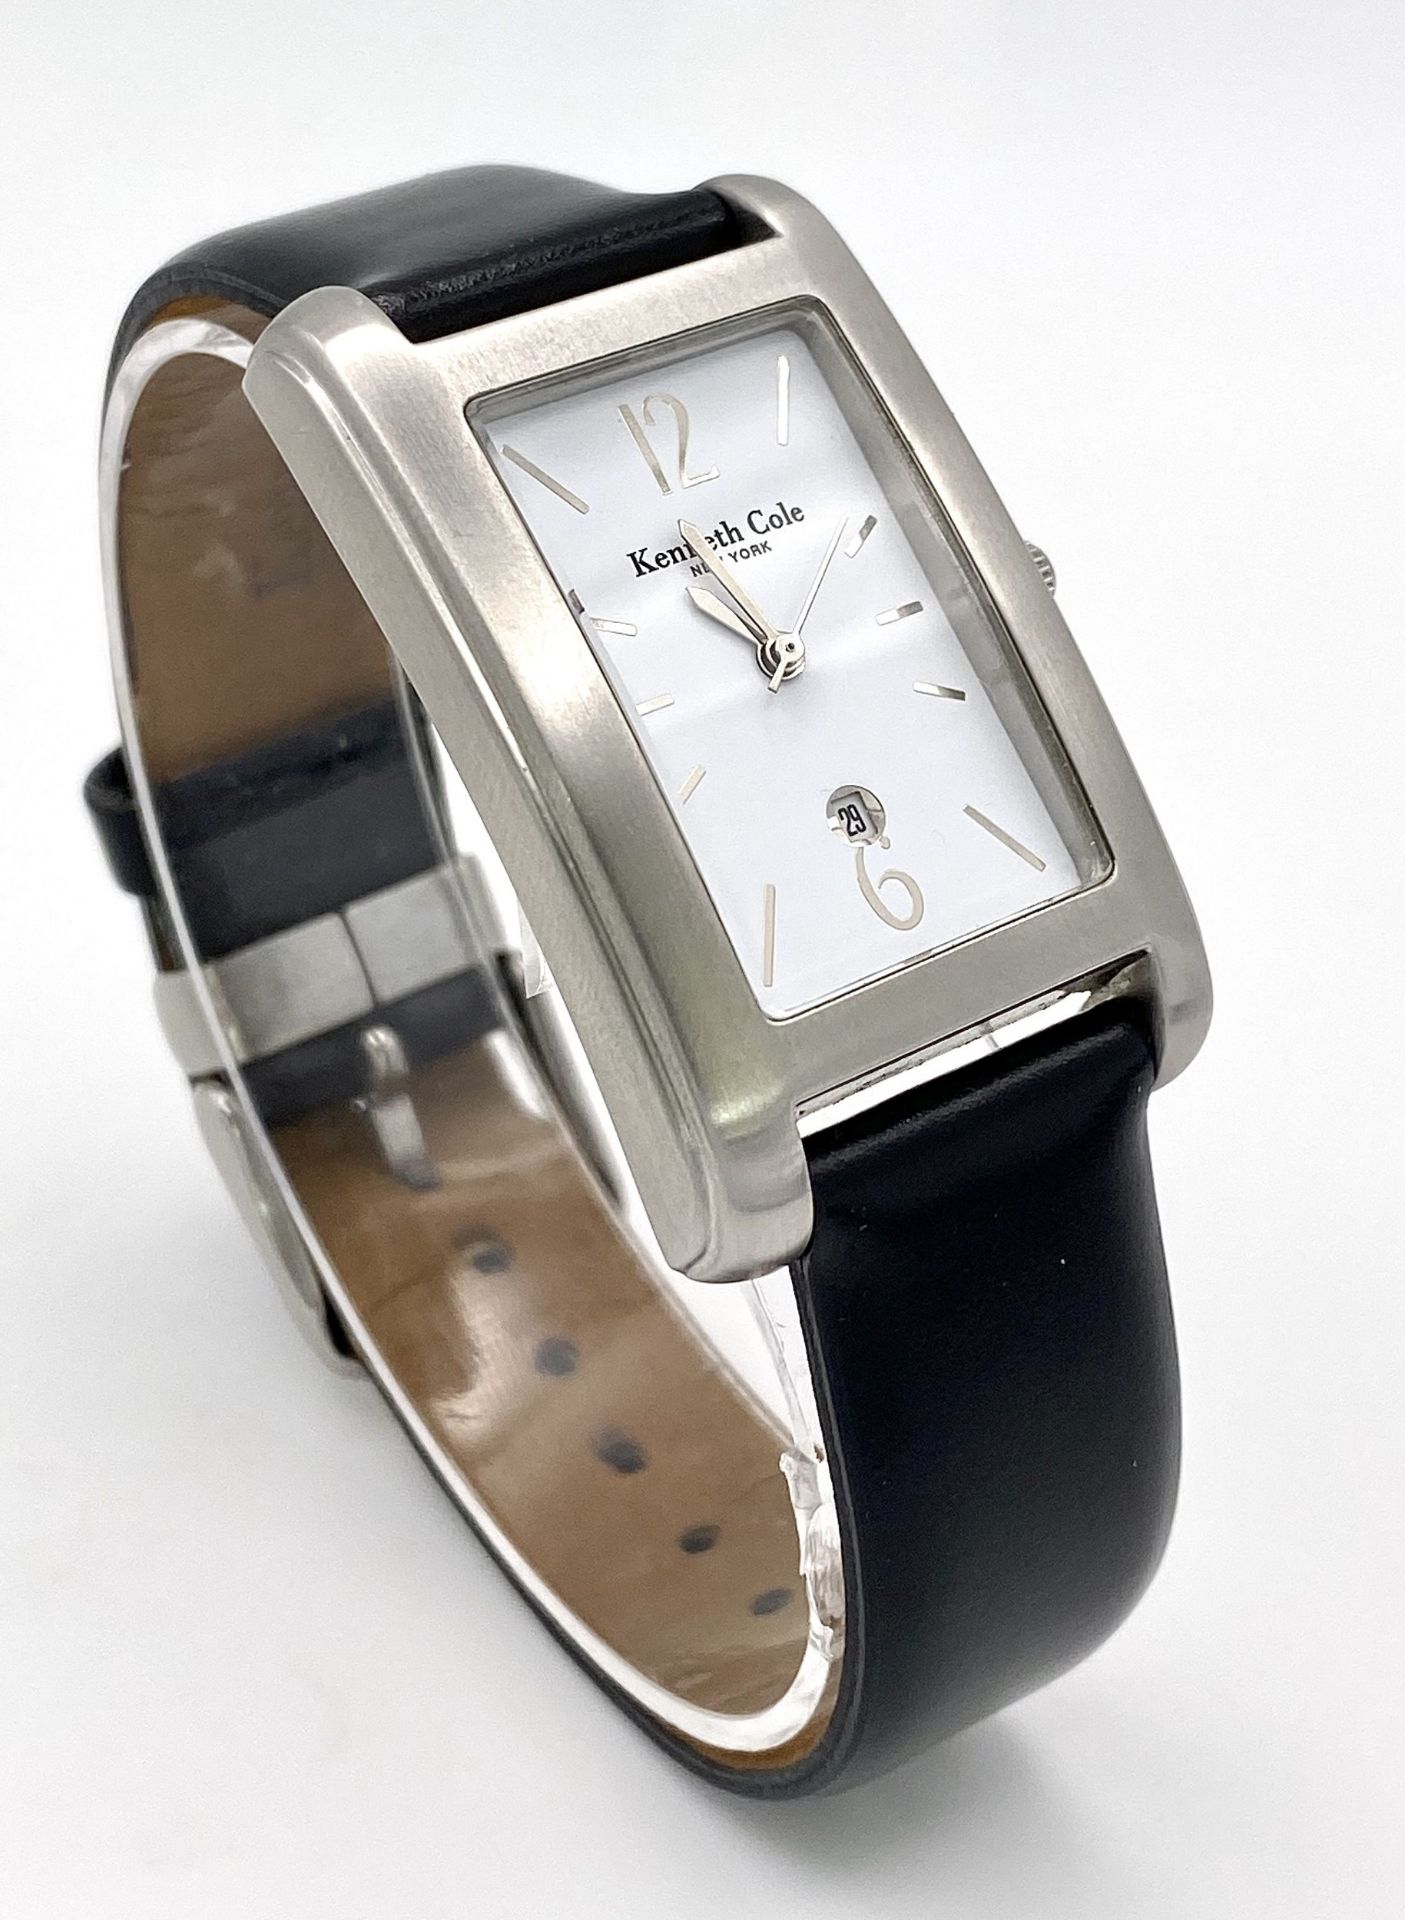 A Kenneth Cole New York Tank Style Quartz Date Watch. 26mm Case. Full Working Order. Comes with - Image 4 of 9